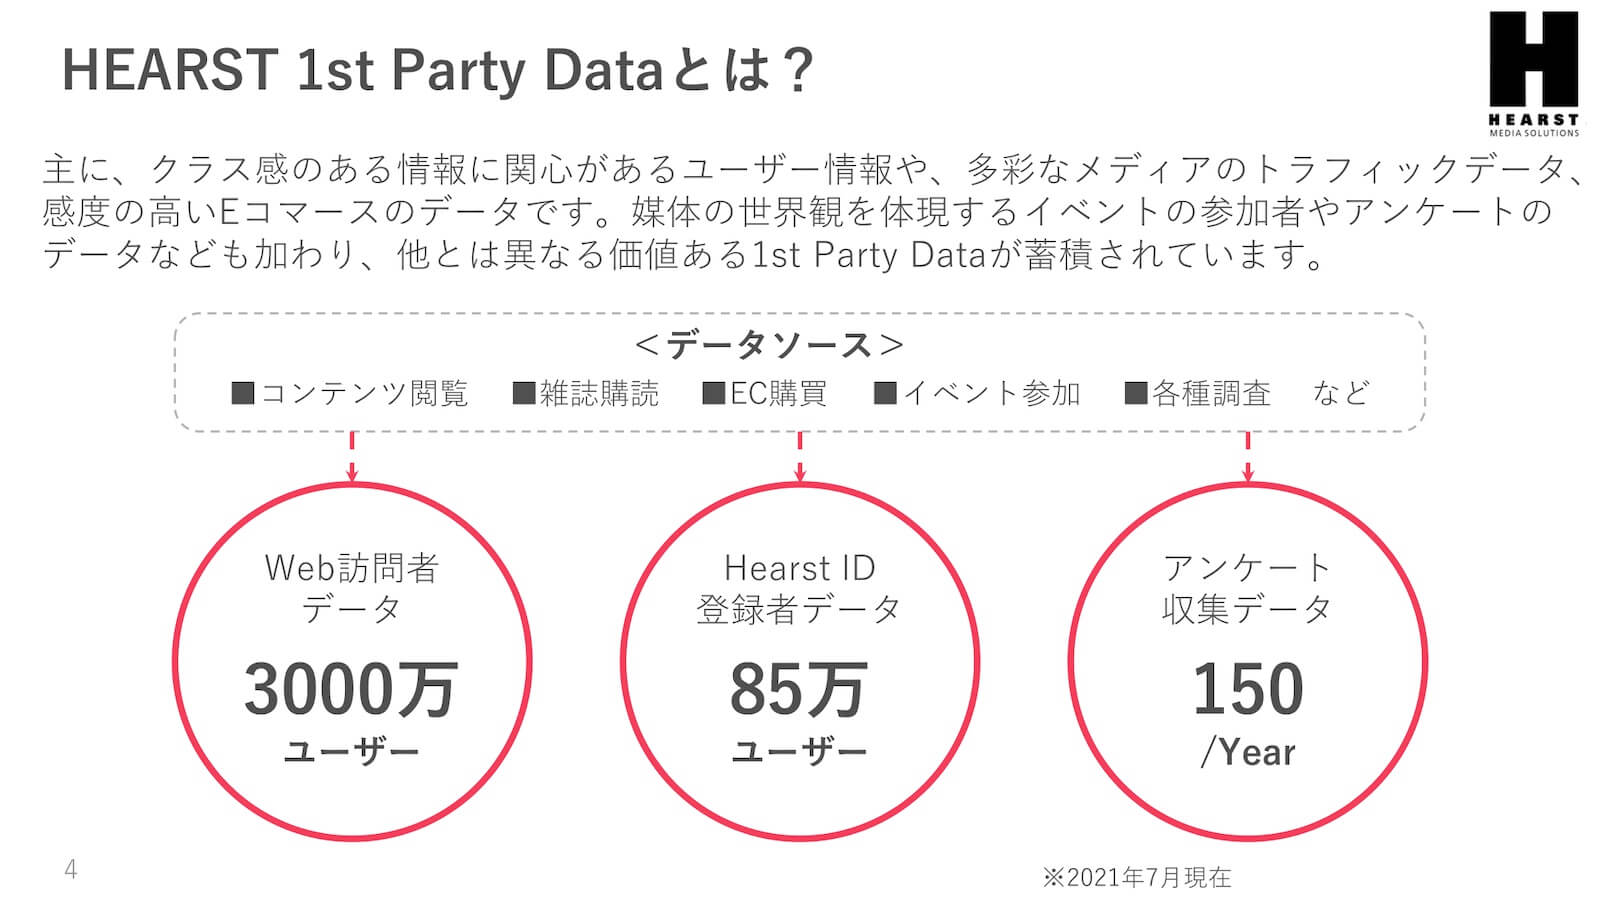 HEARST 1st Party Dataとは？